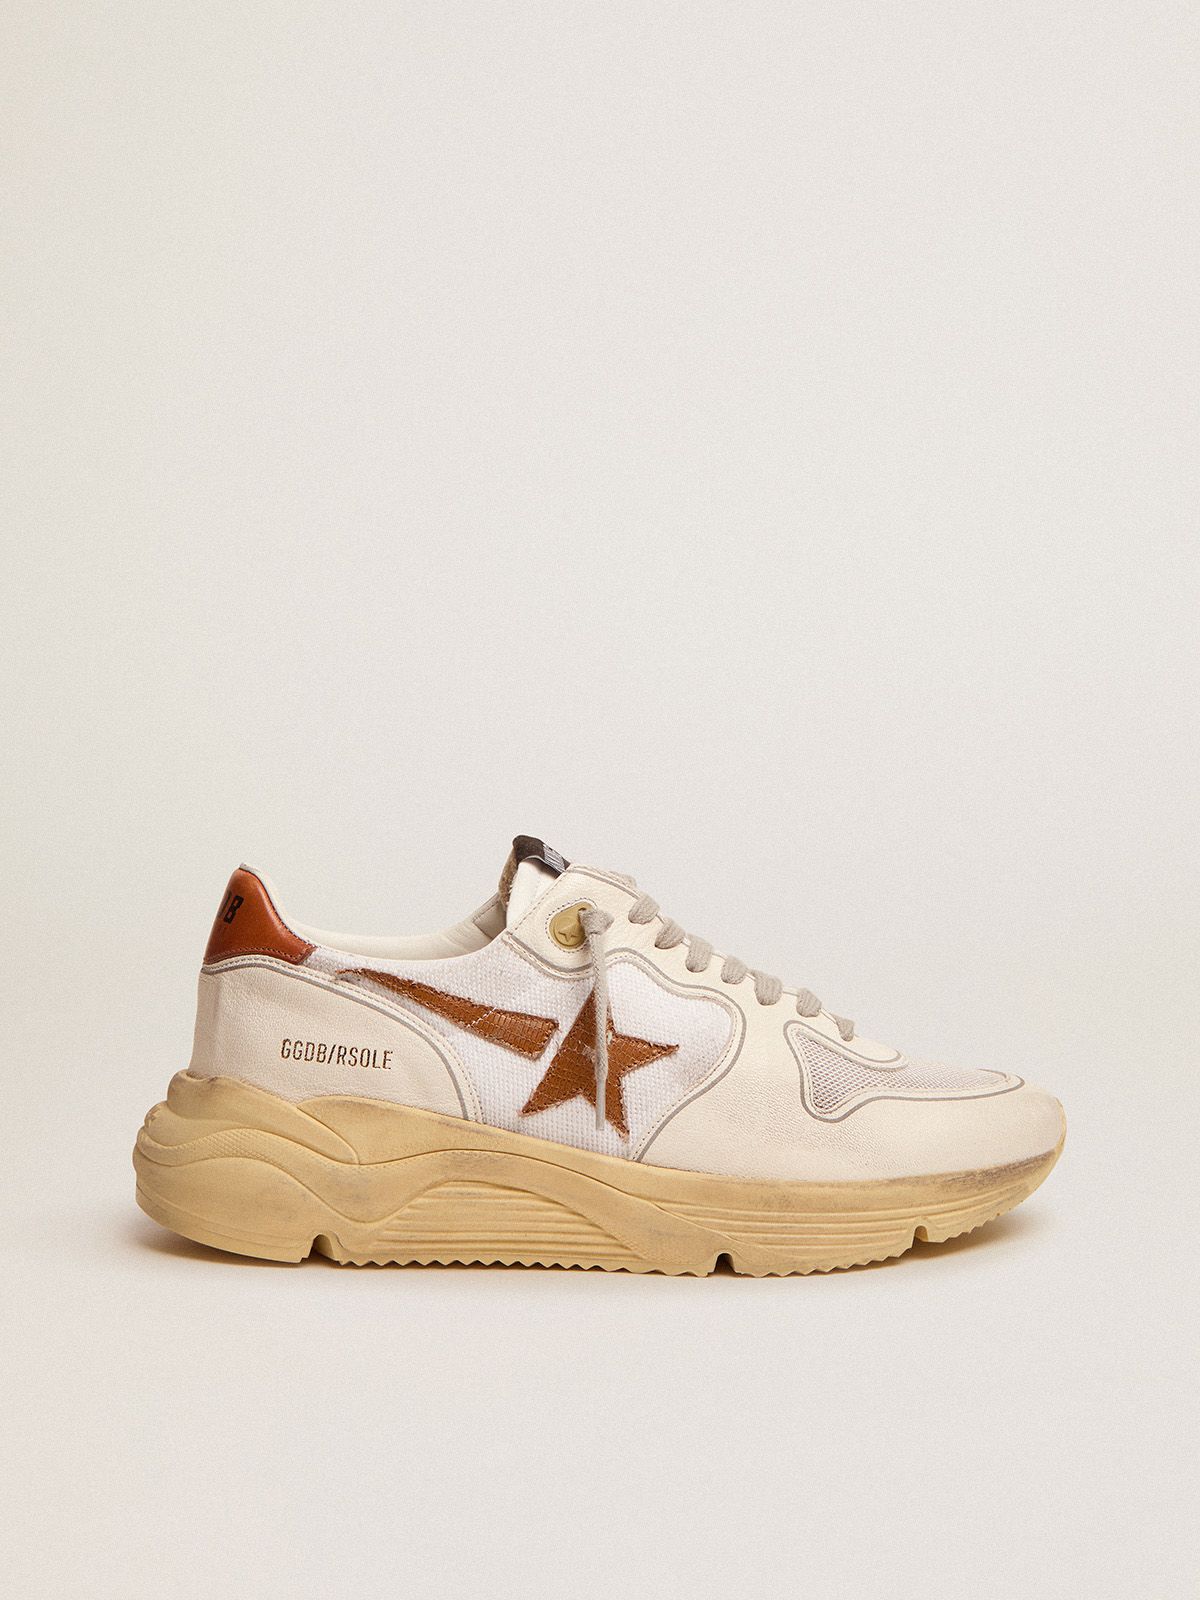 golden goose LTD Running leather tab brown tan and Sole heel with star sneakers lizard-print